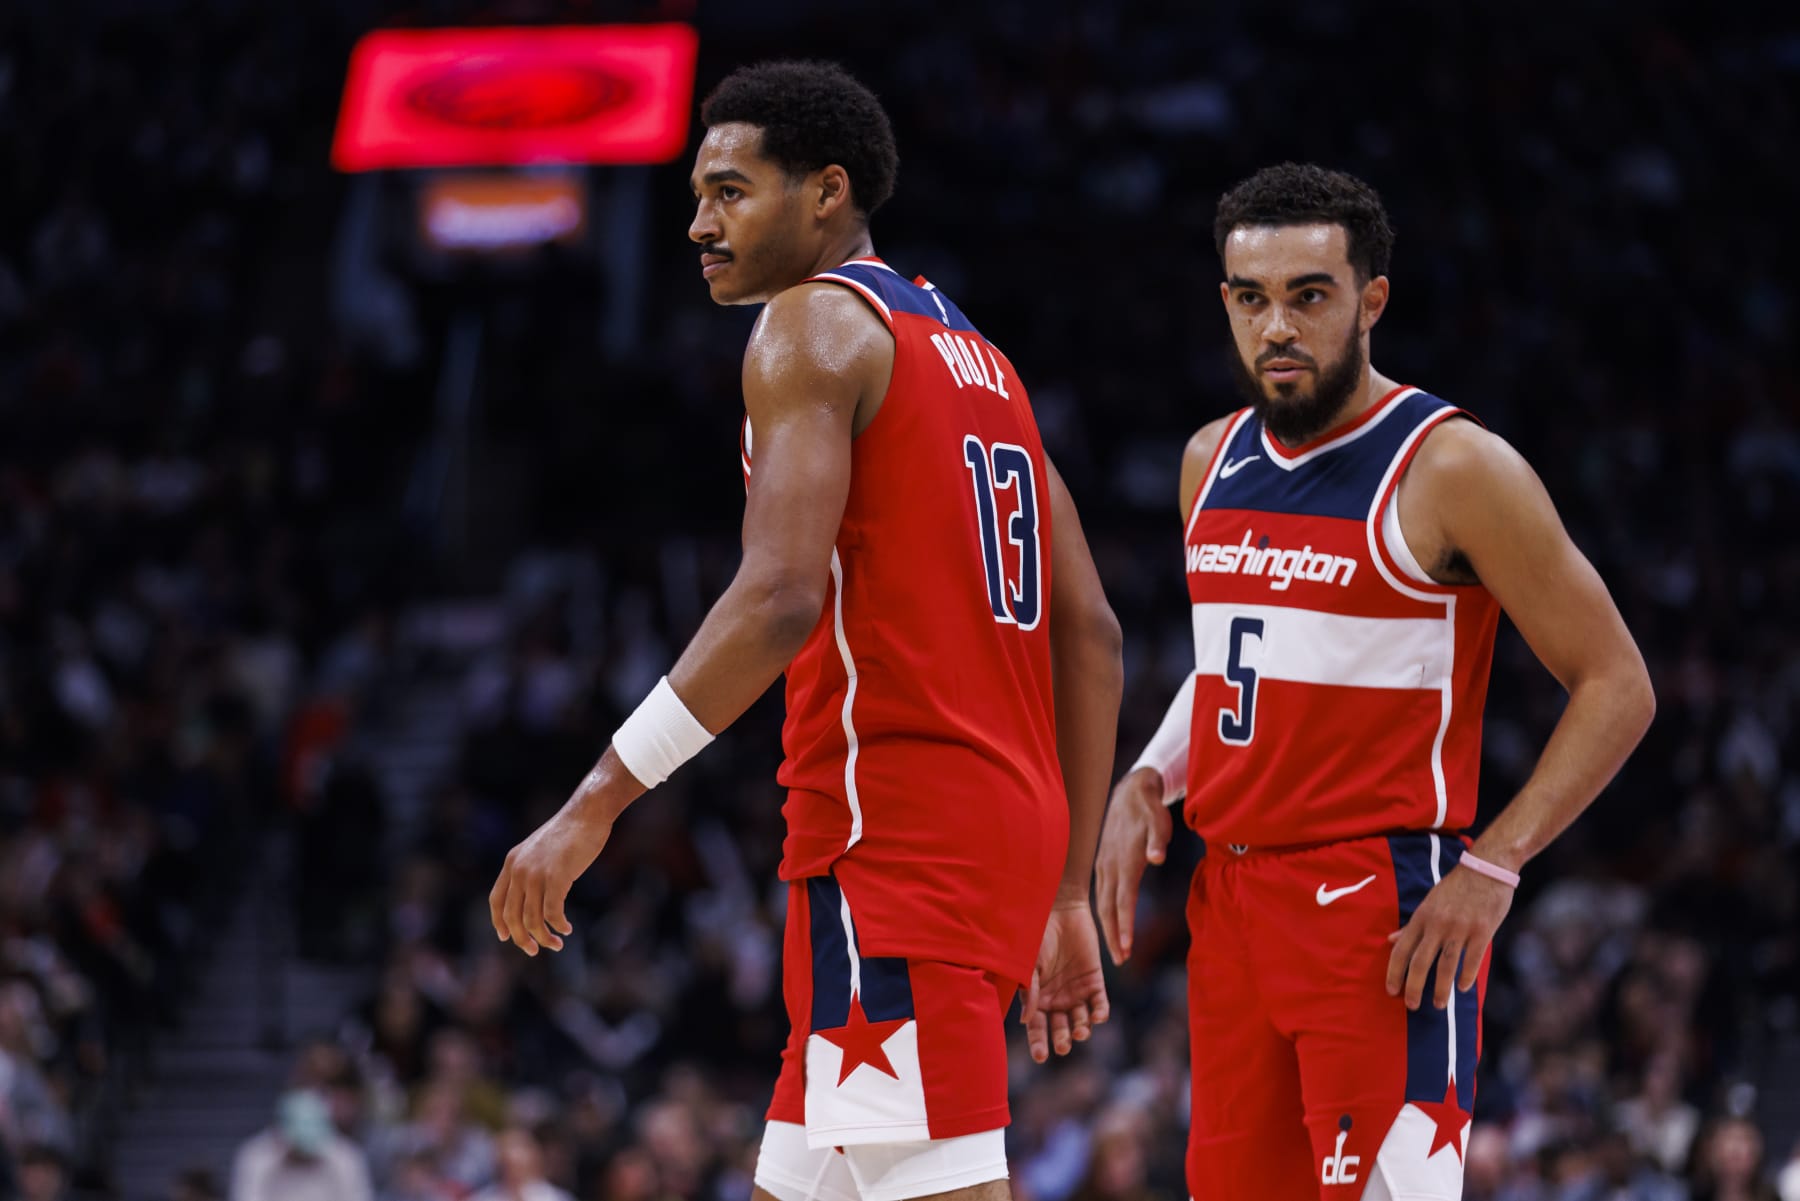 The Wizards' rebuild gets off to a choppy start in season-opening loss -  The Washington Post